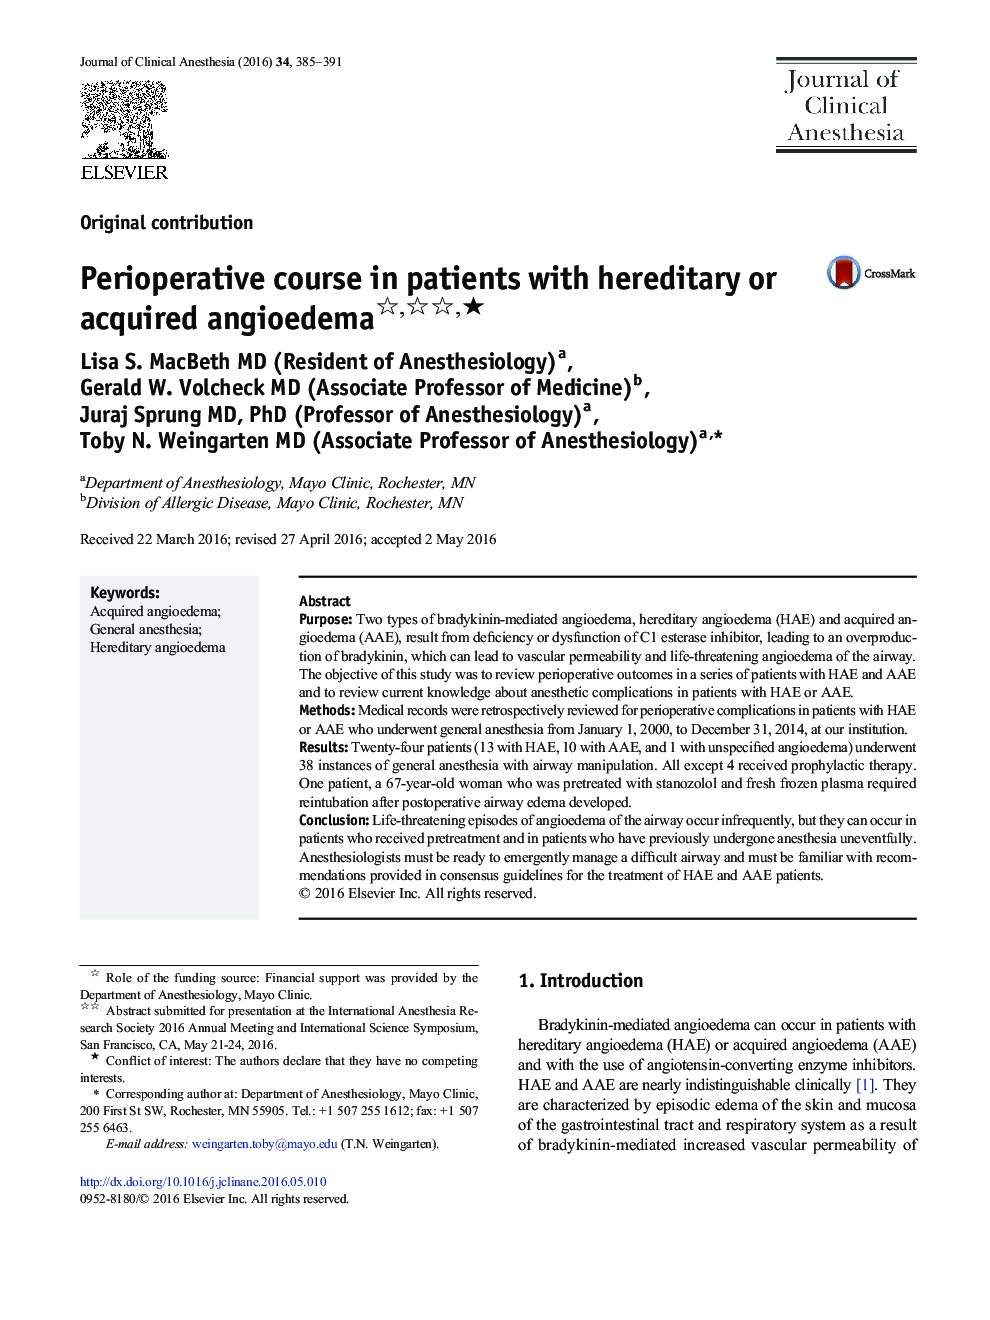 Perioperative course in patients with hereditary or acquired angioedema